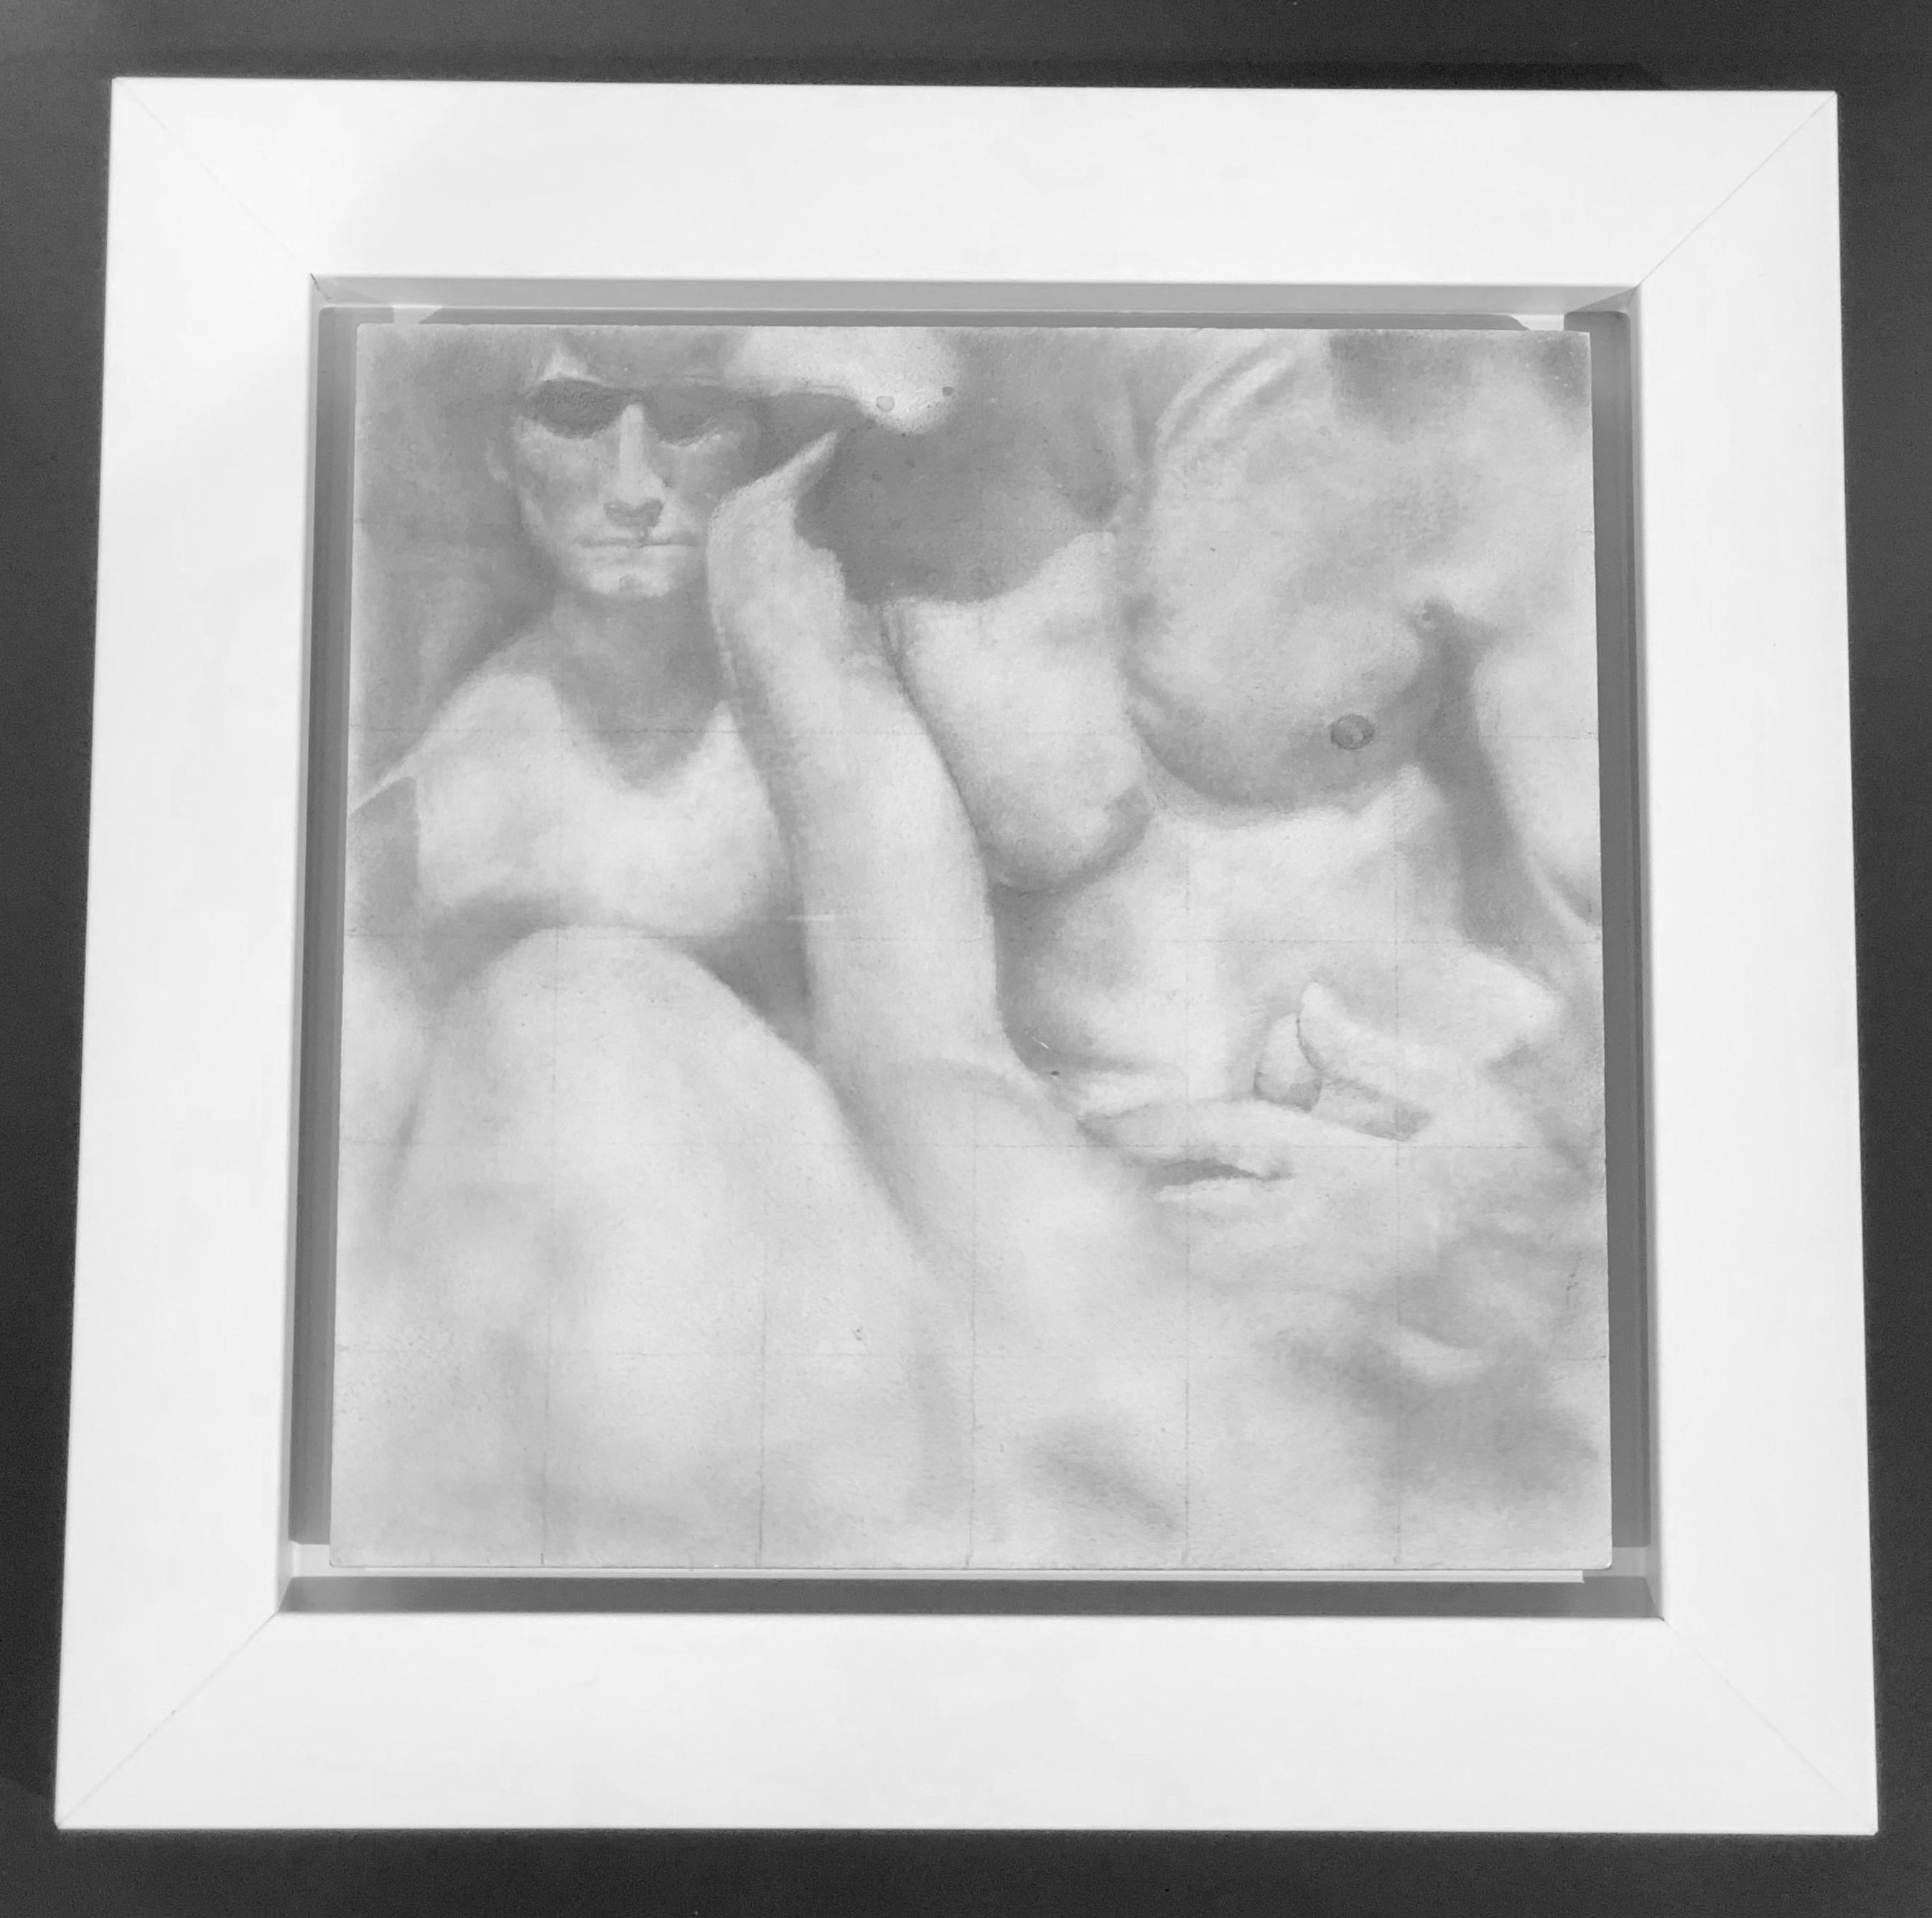 Knit - Original Graphite Drawing on Panel of Nude Male Figures - Art by Rick Sindt